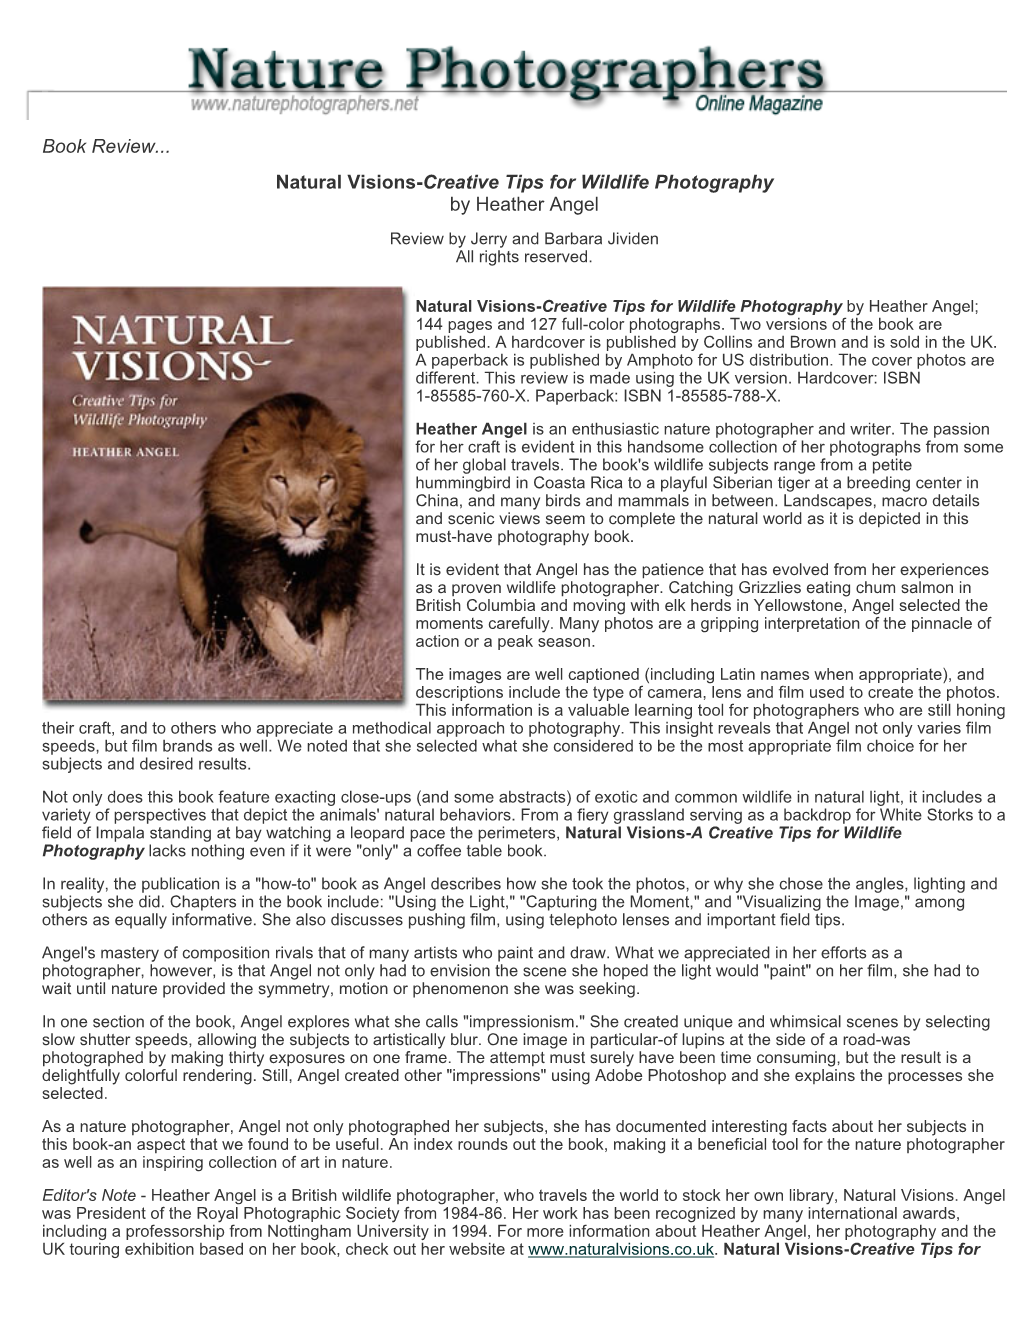 Nature Photography Association (NANPA) and the American Society of Media Photographers (ASMP)